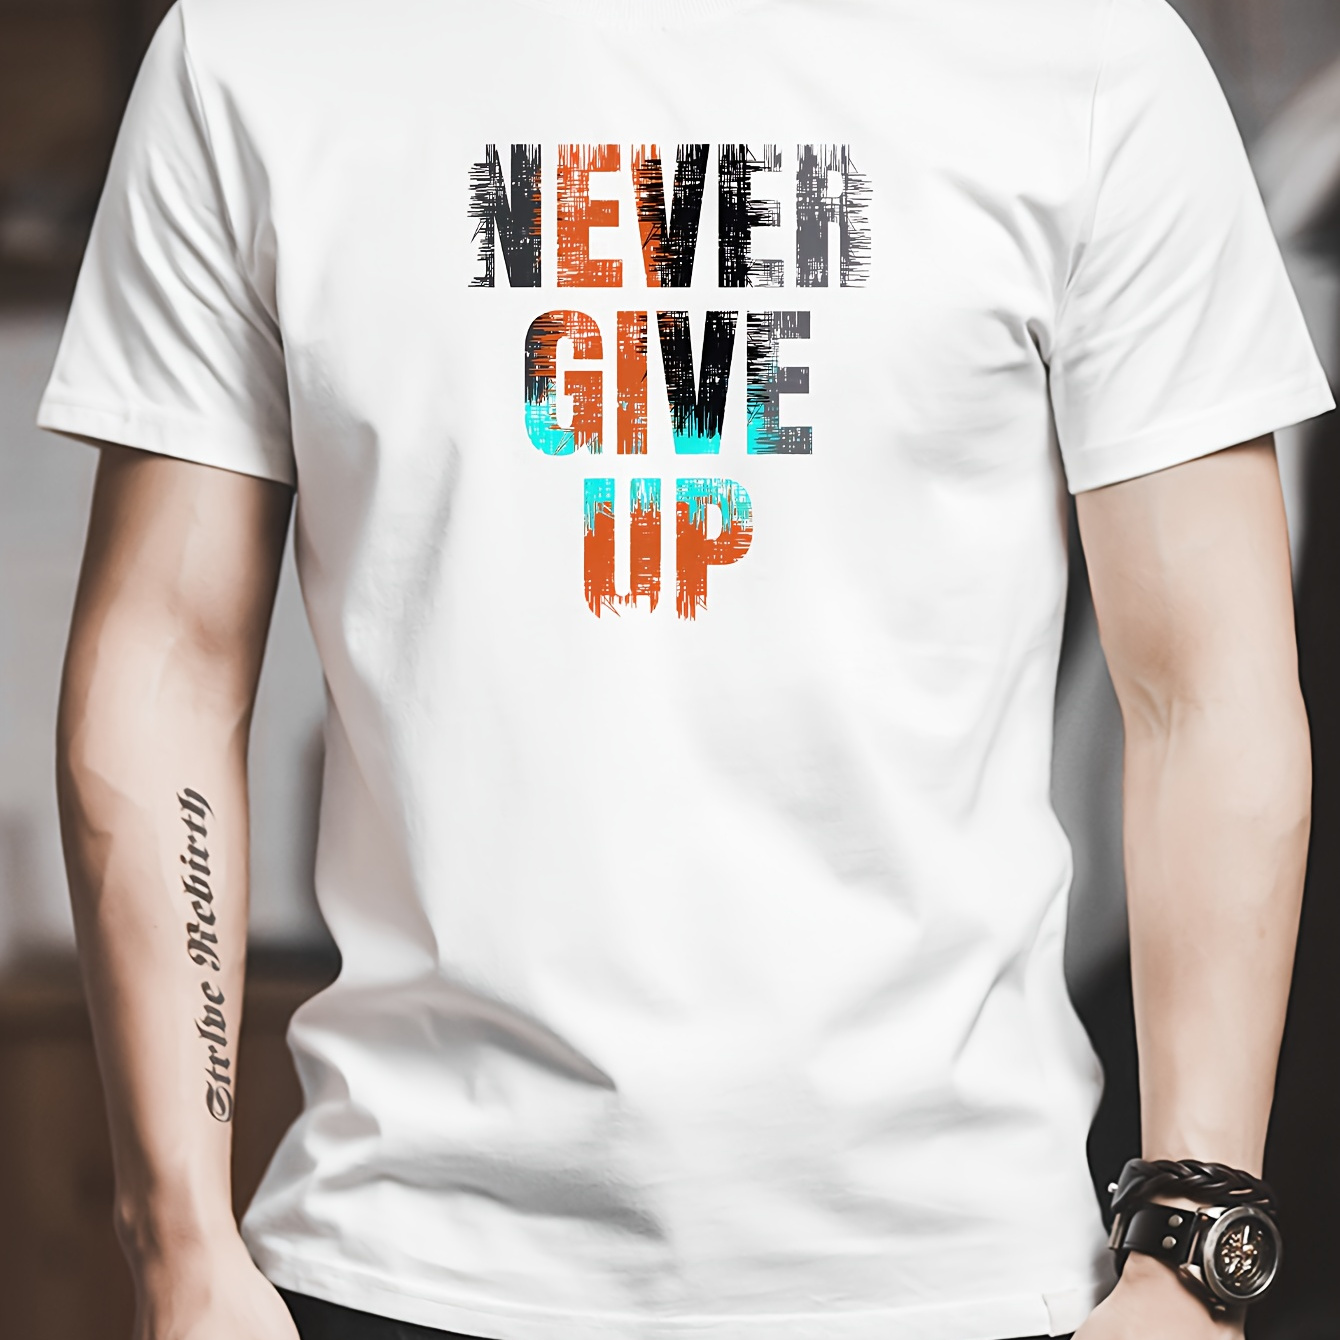 

Men's Pure Cotton T-shirt, 'never Give Up' Letter Print Short Sleeve Crew Neck Tees For Summer, Casual Outdoor Comfy Clothing For Male